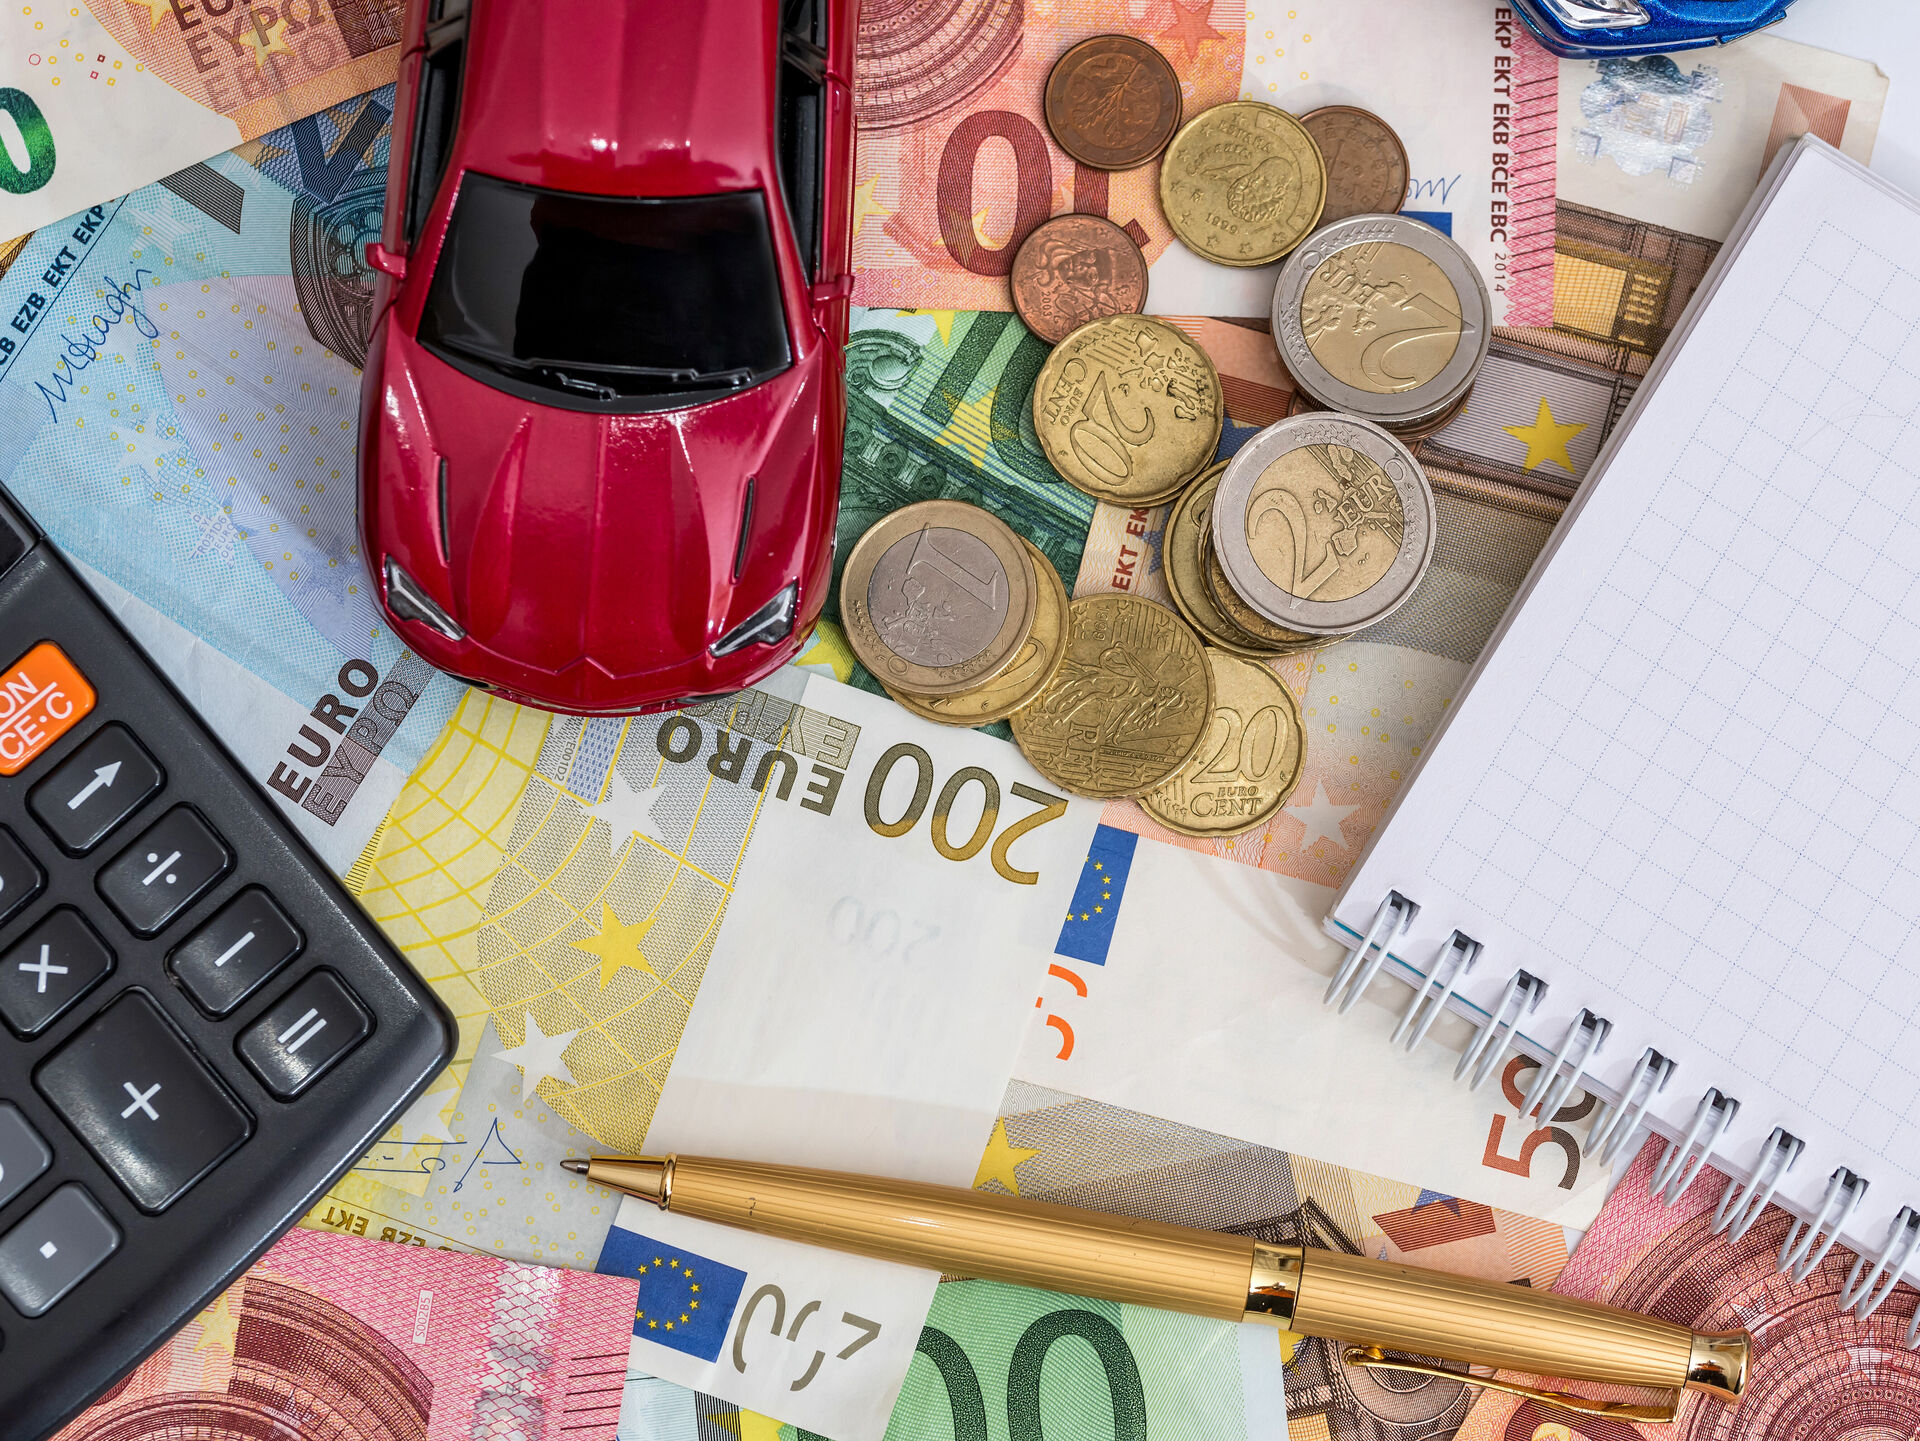 Which option is more cost-effective: sharing a car or owning one?